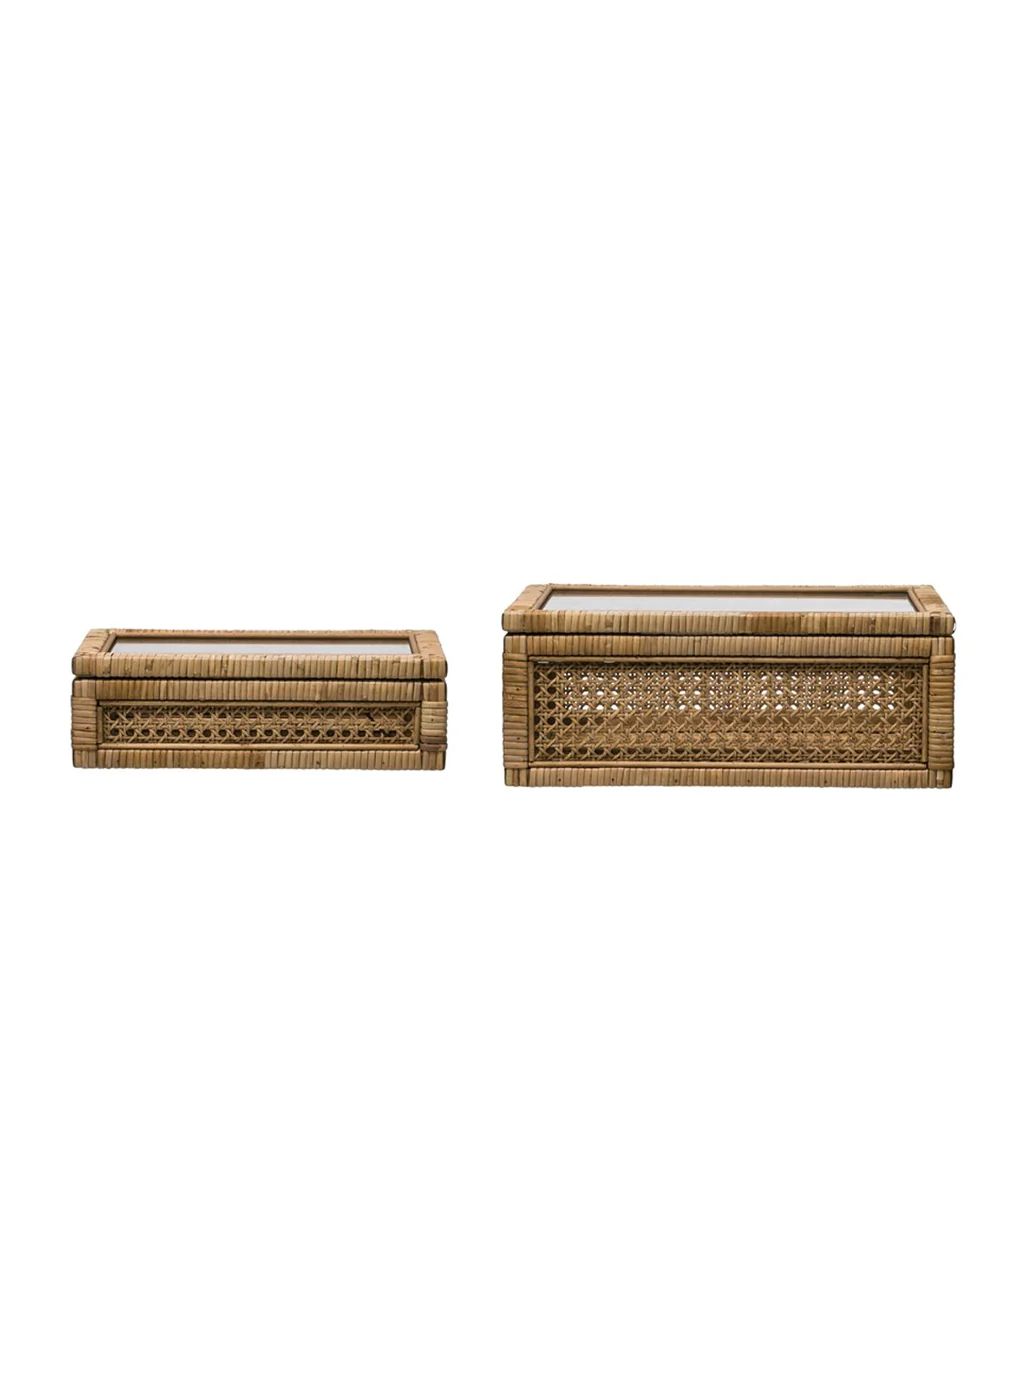 Rattan Display Boxes, Set of 2 | House of Jade Home